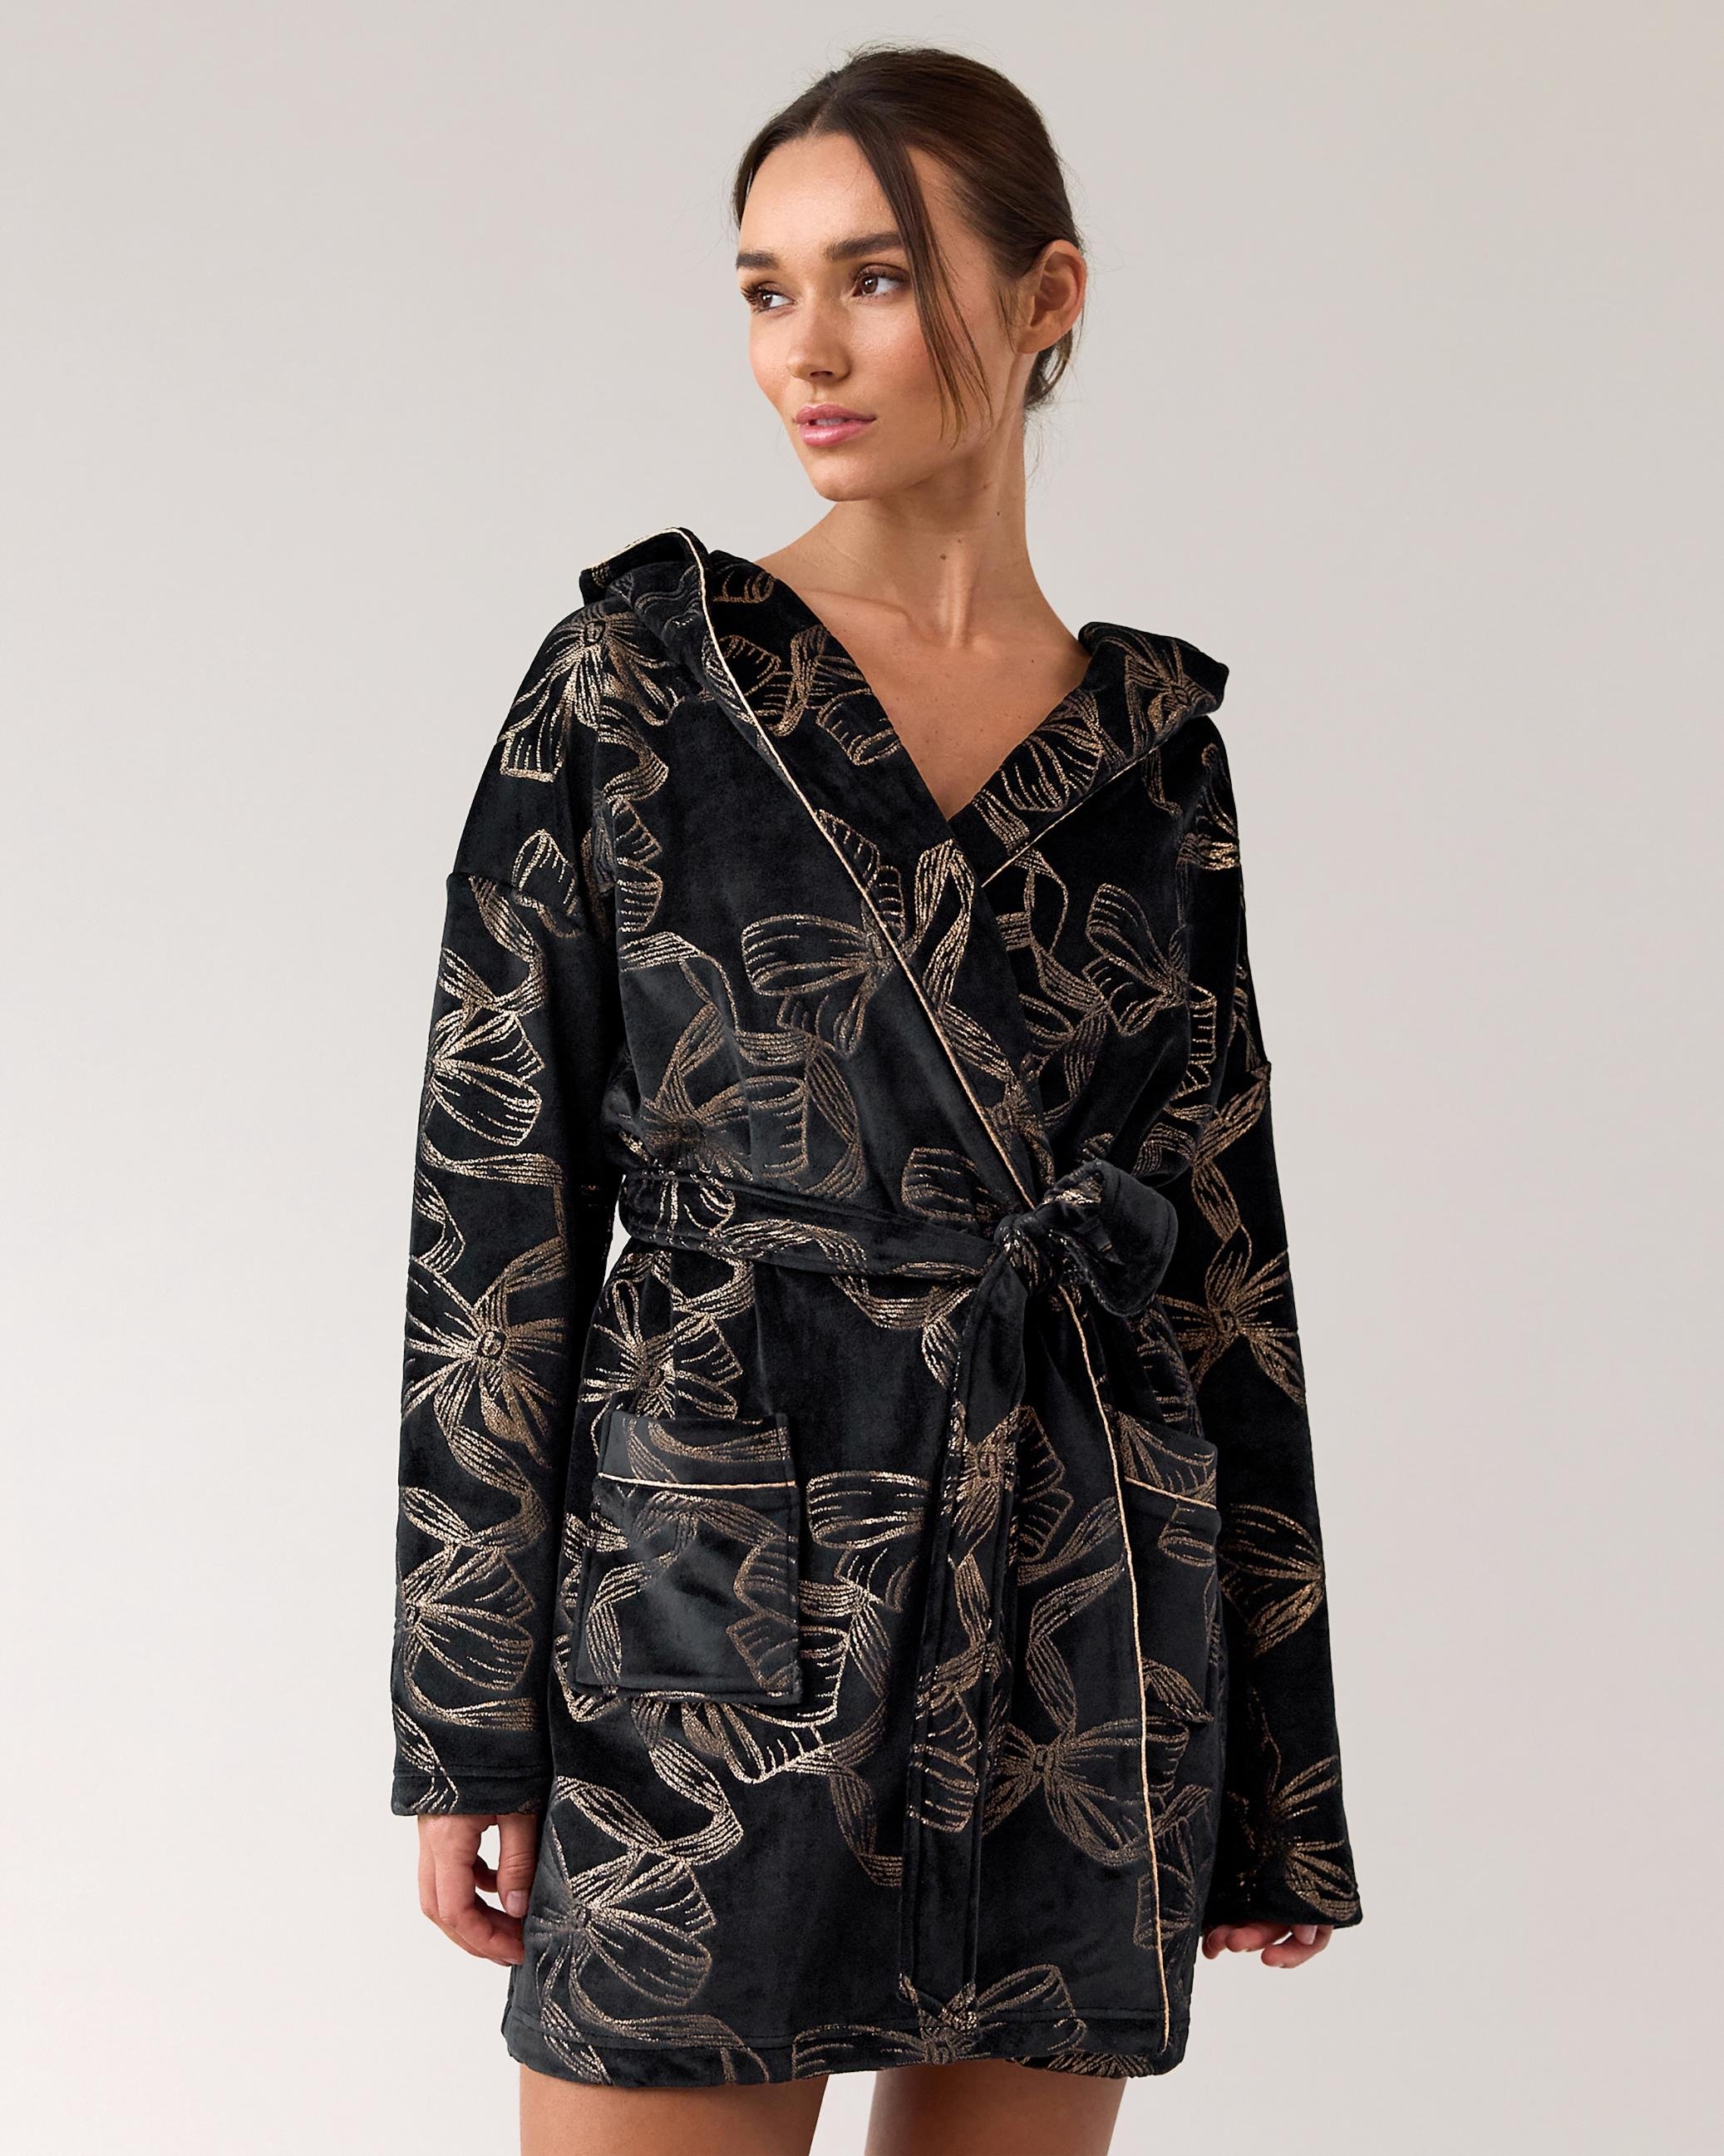 Foil Bow Print Short Dressing Gown - BOWWEE - Black by TED BAKER